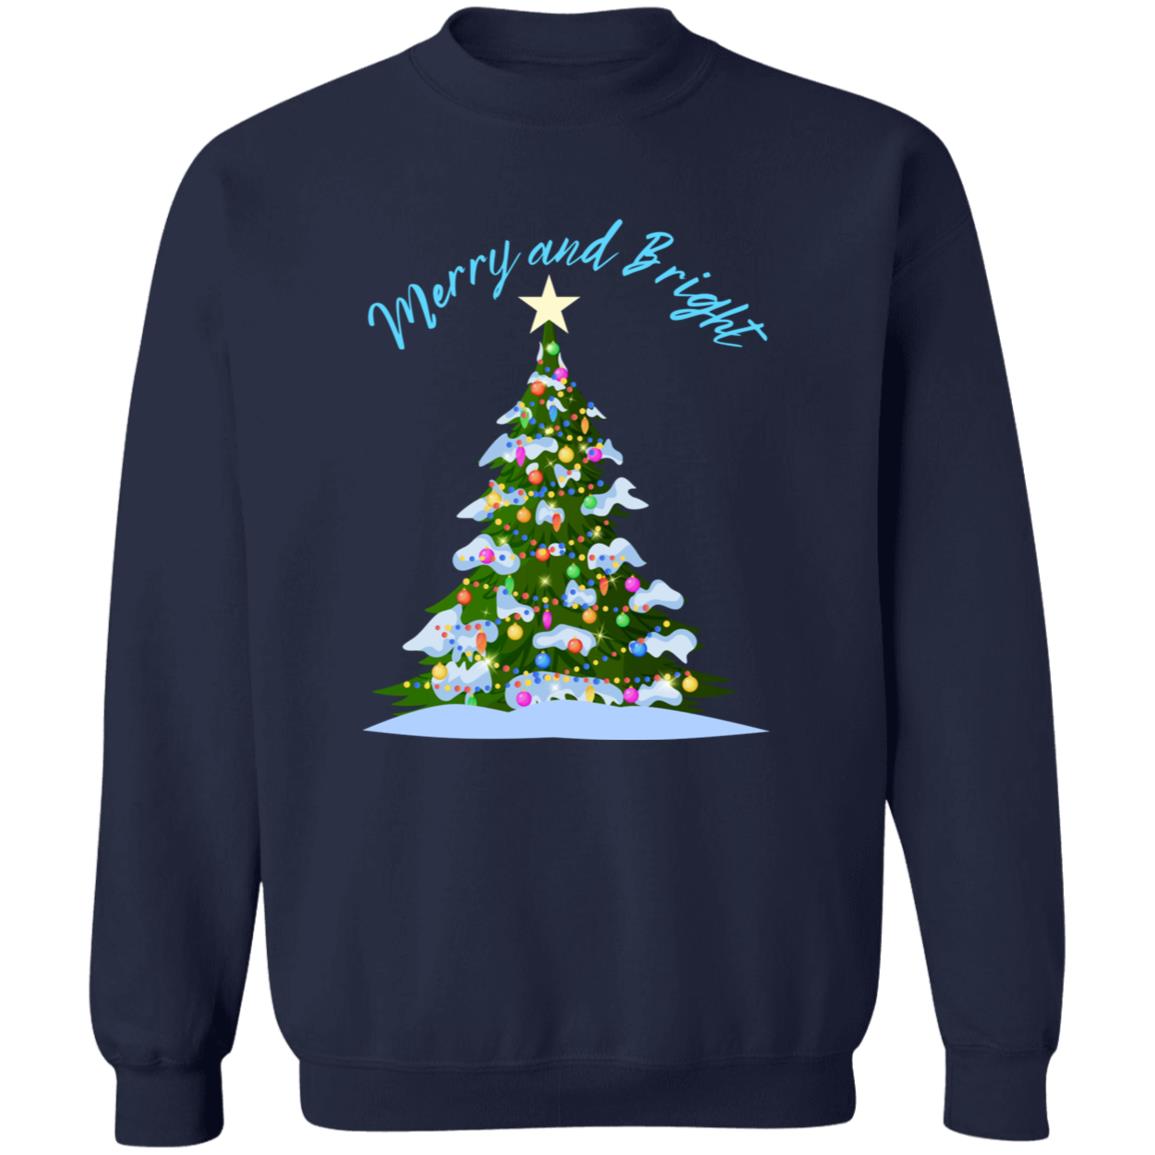 Merry and Bright - Pullover Sweatshirt